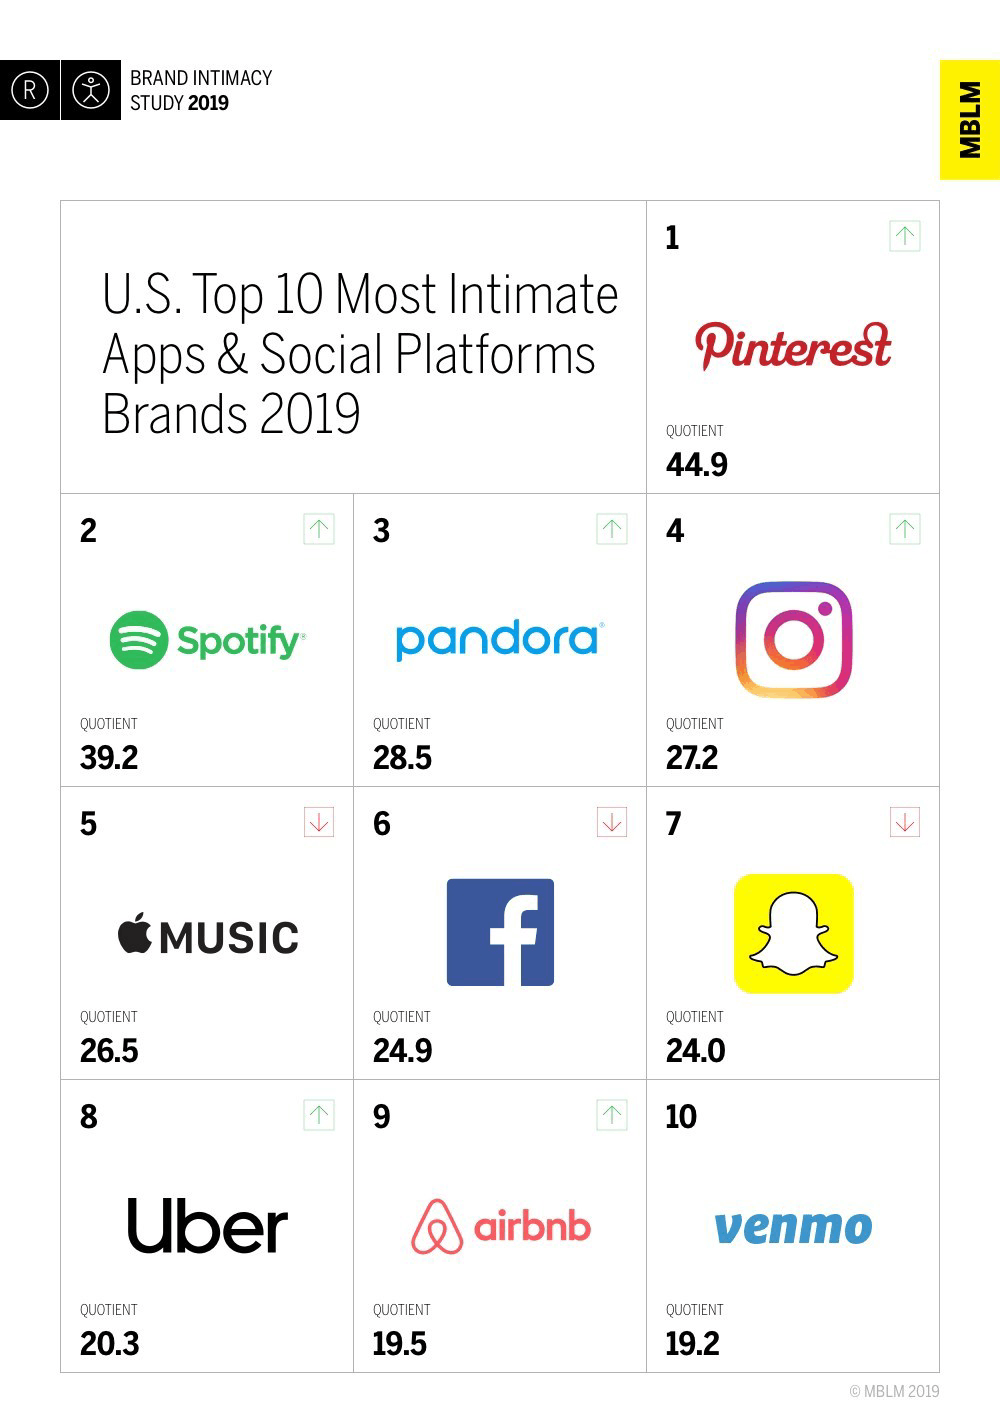 U.S. Top 10 Most Intimate Apps, Brands and Social Media Platforms 2019